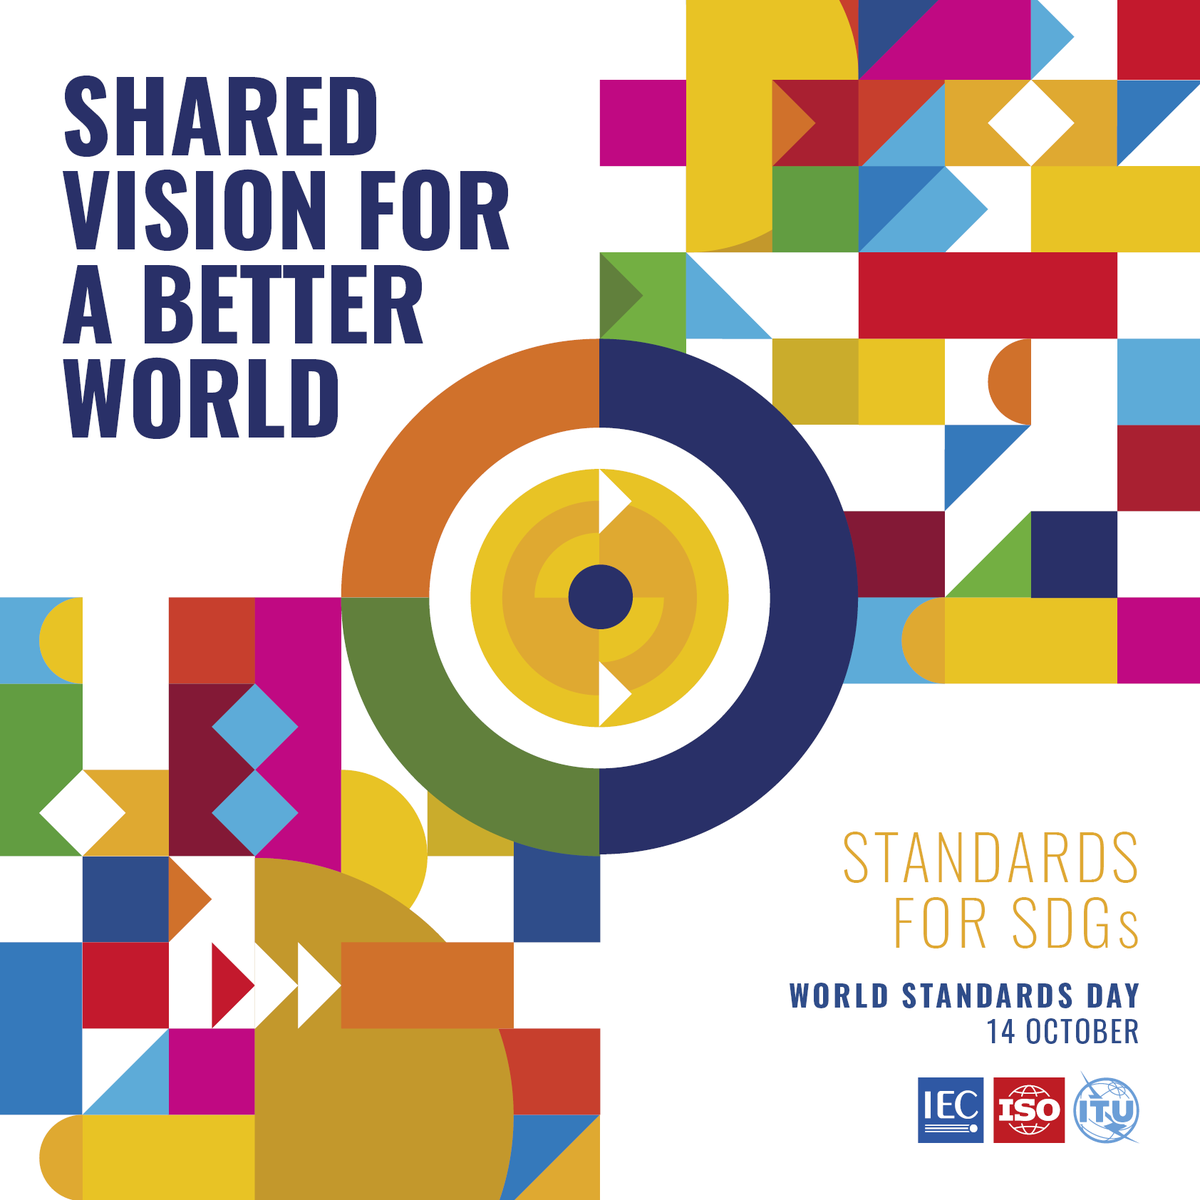 October 14 is World Standards Day! It is a day to pay tribute to the collaborative efforts of thousands of experts worldwide who develop the voluntary technical agreements that are published as International Standards. Learn more about #WSD here: bit.ly/2FuzcH2